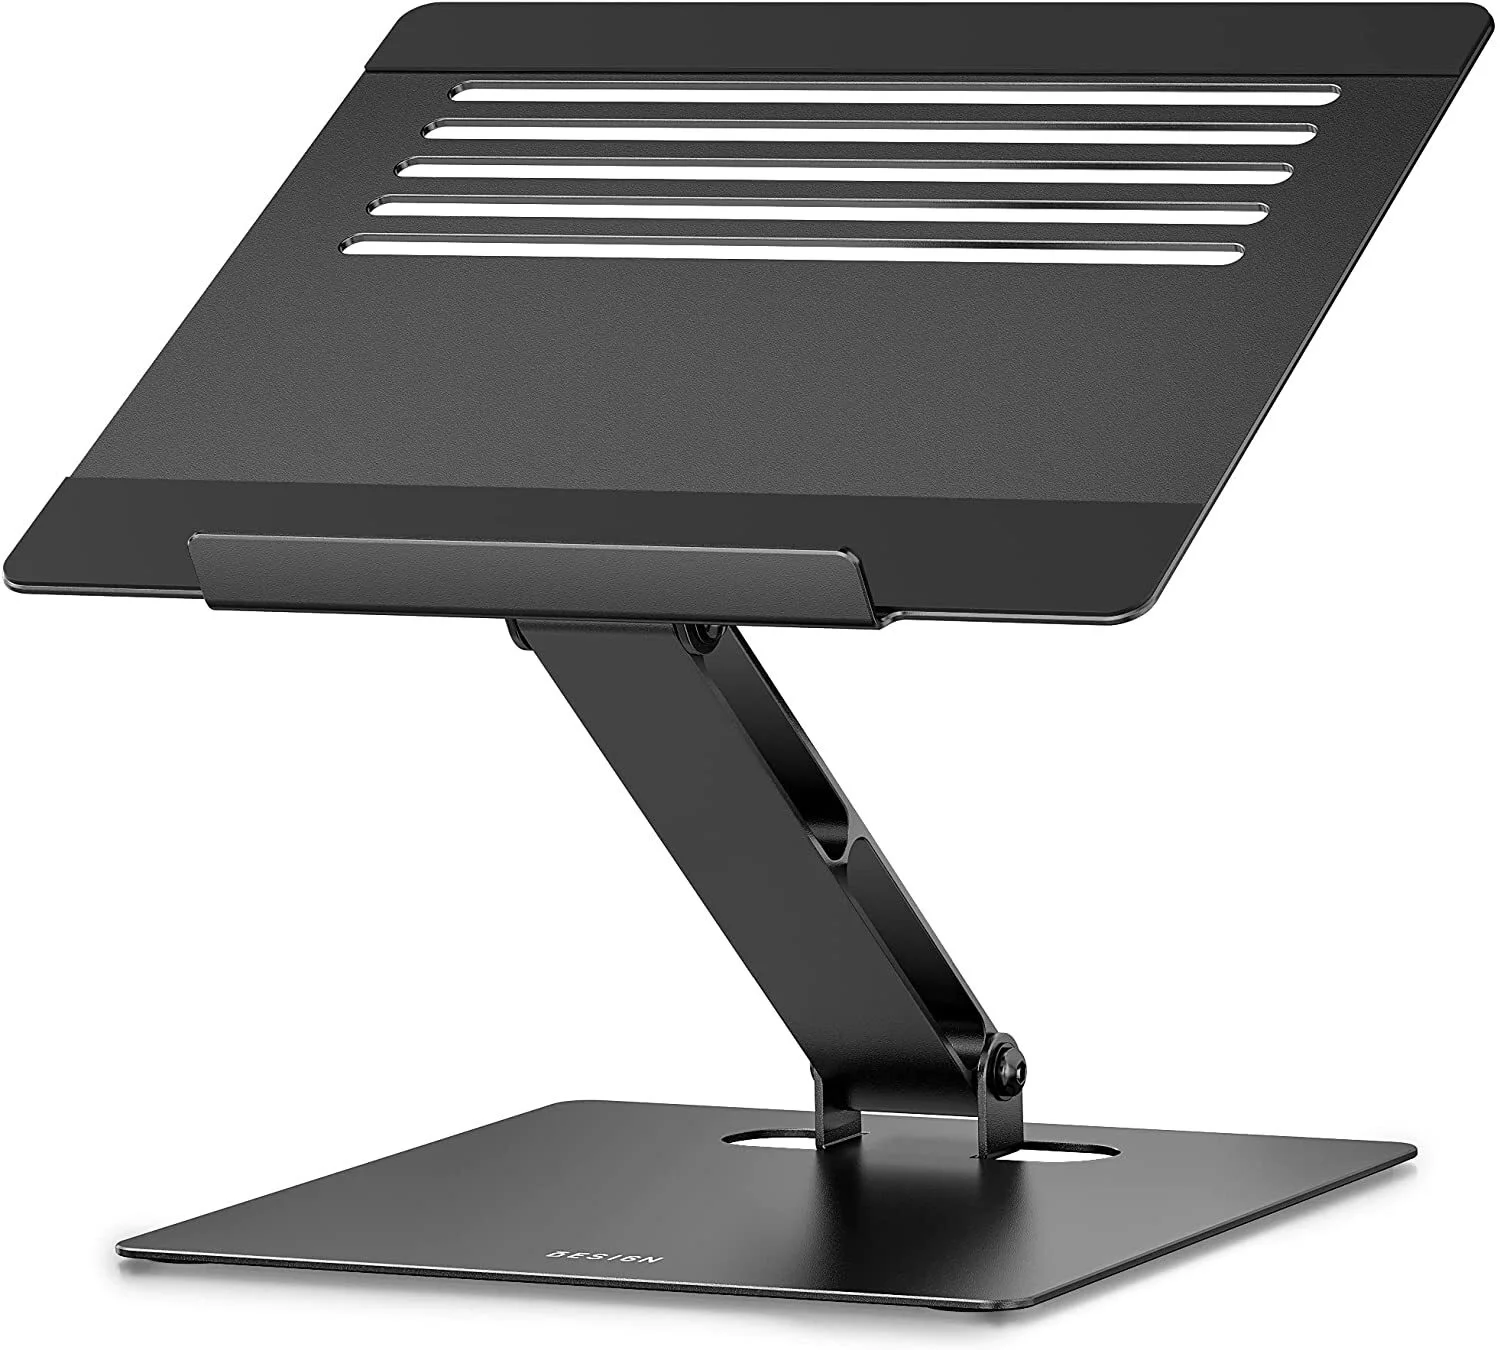 Besign LSX5 Aluminum Laptop Stand, Ergonomic Adjustable Notebook Stand, Riser Holder Computer Stand Compatible with Air, Pro,